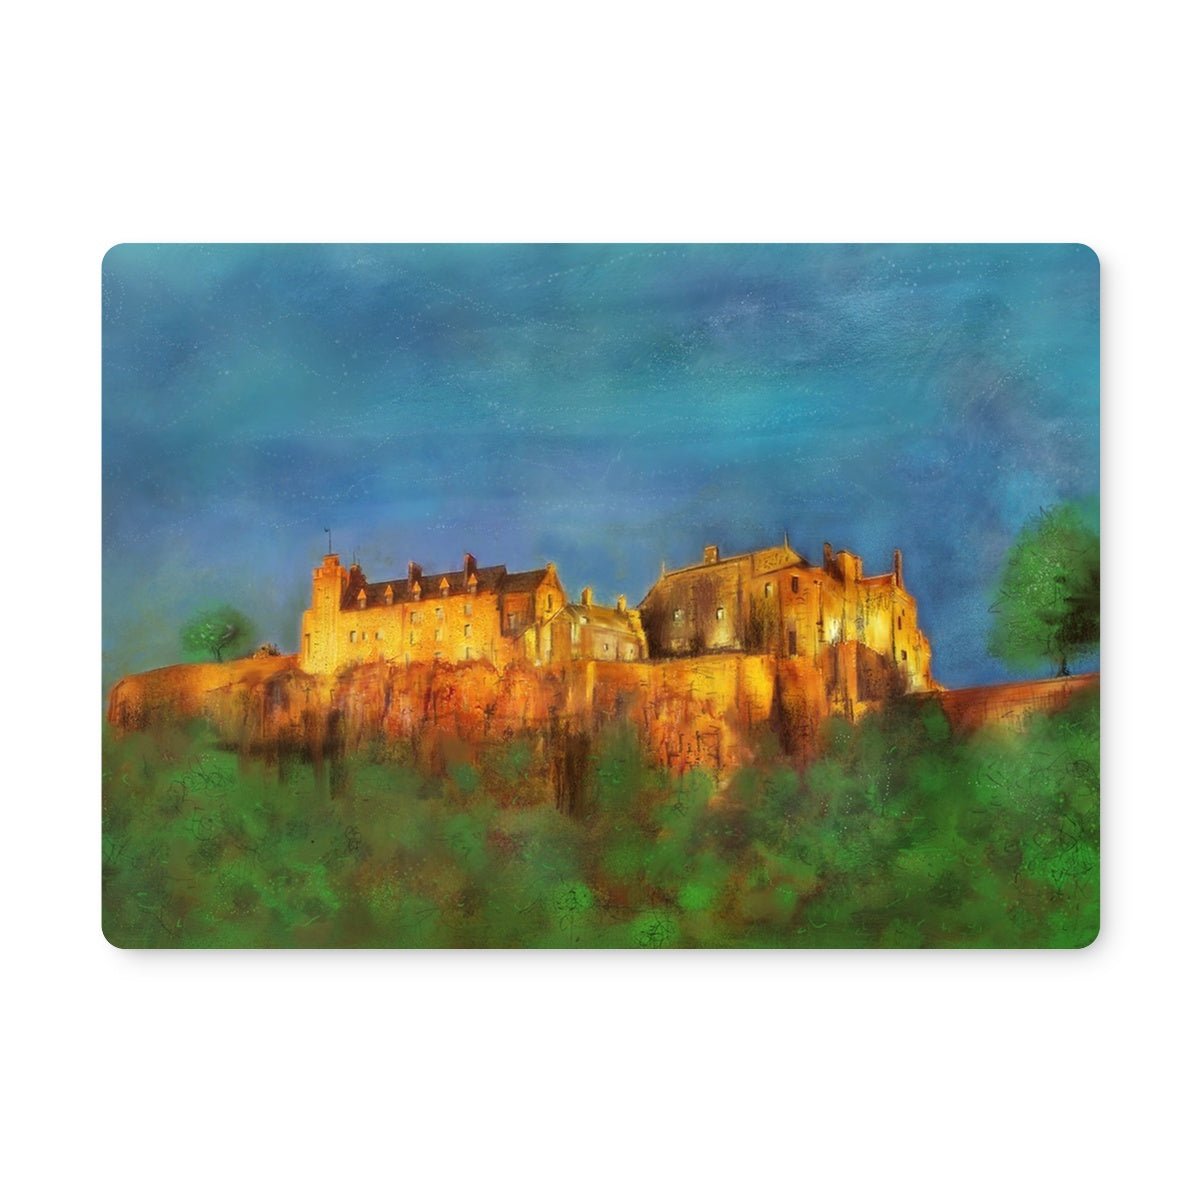 Stirling Castle Art Gifts Placemat-Placemats-Scottish Castles Art Gallery-4 Placemats-Paintings, Prints, Homeware, Art Gifts From Scotland By Scottish Artist Kevin Hunter